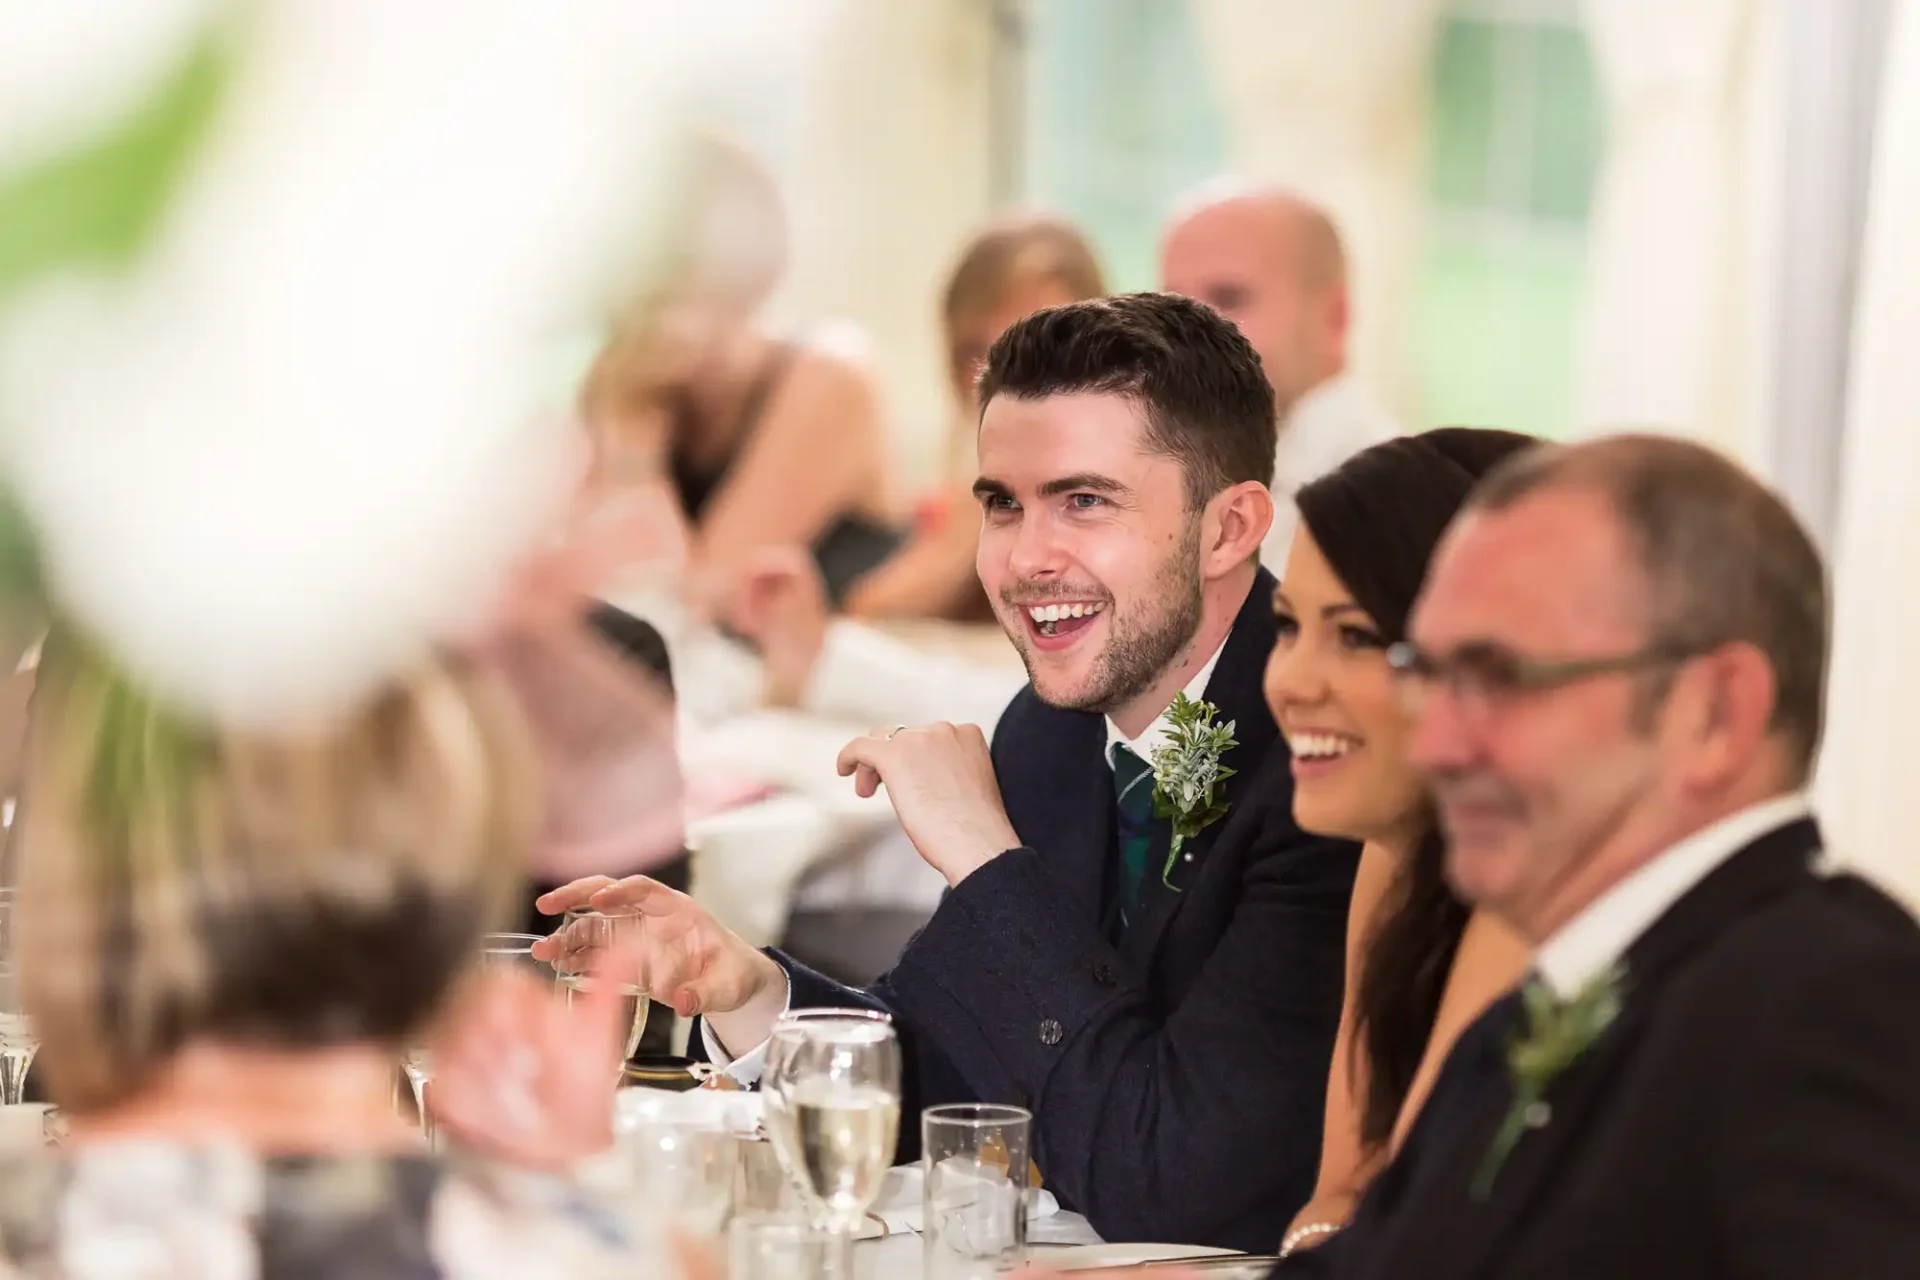 A groom sitting at a wedding reception table, smiling and conversing with guests, with a focus on his joyful expression.